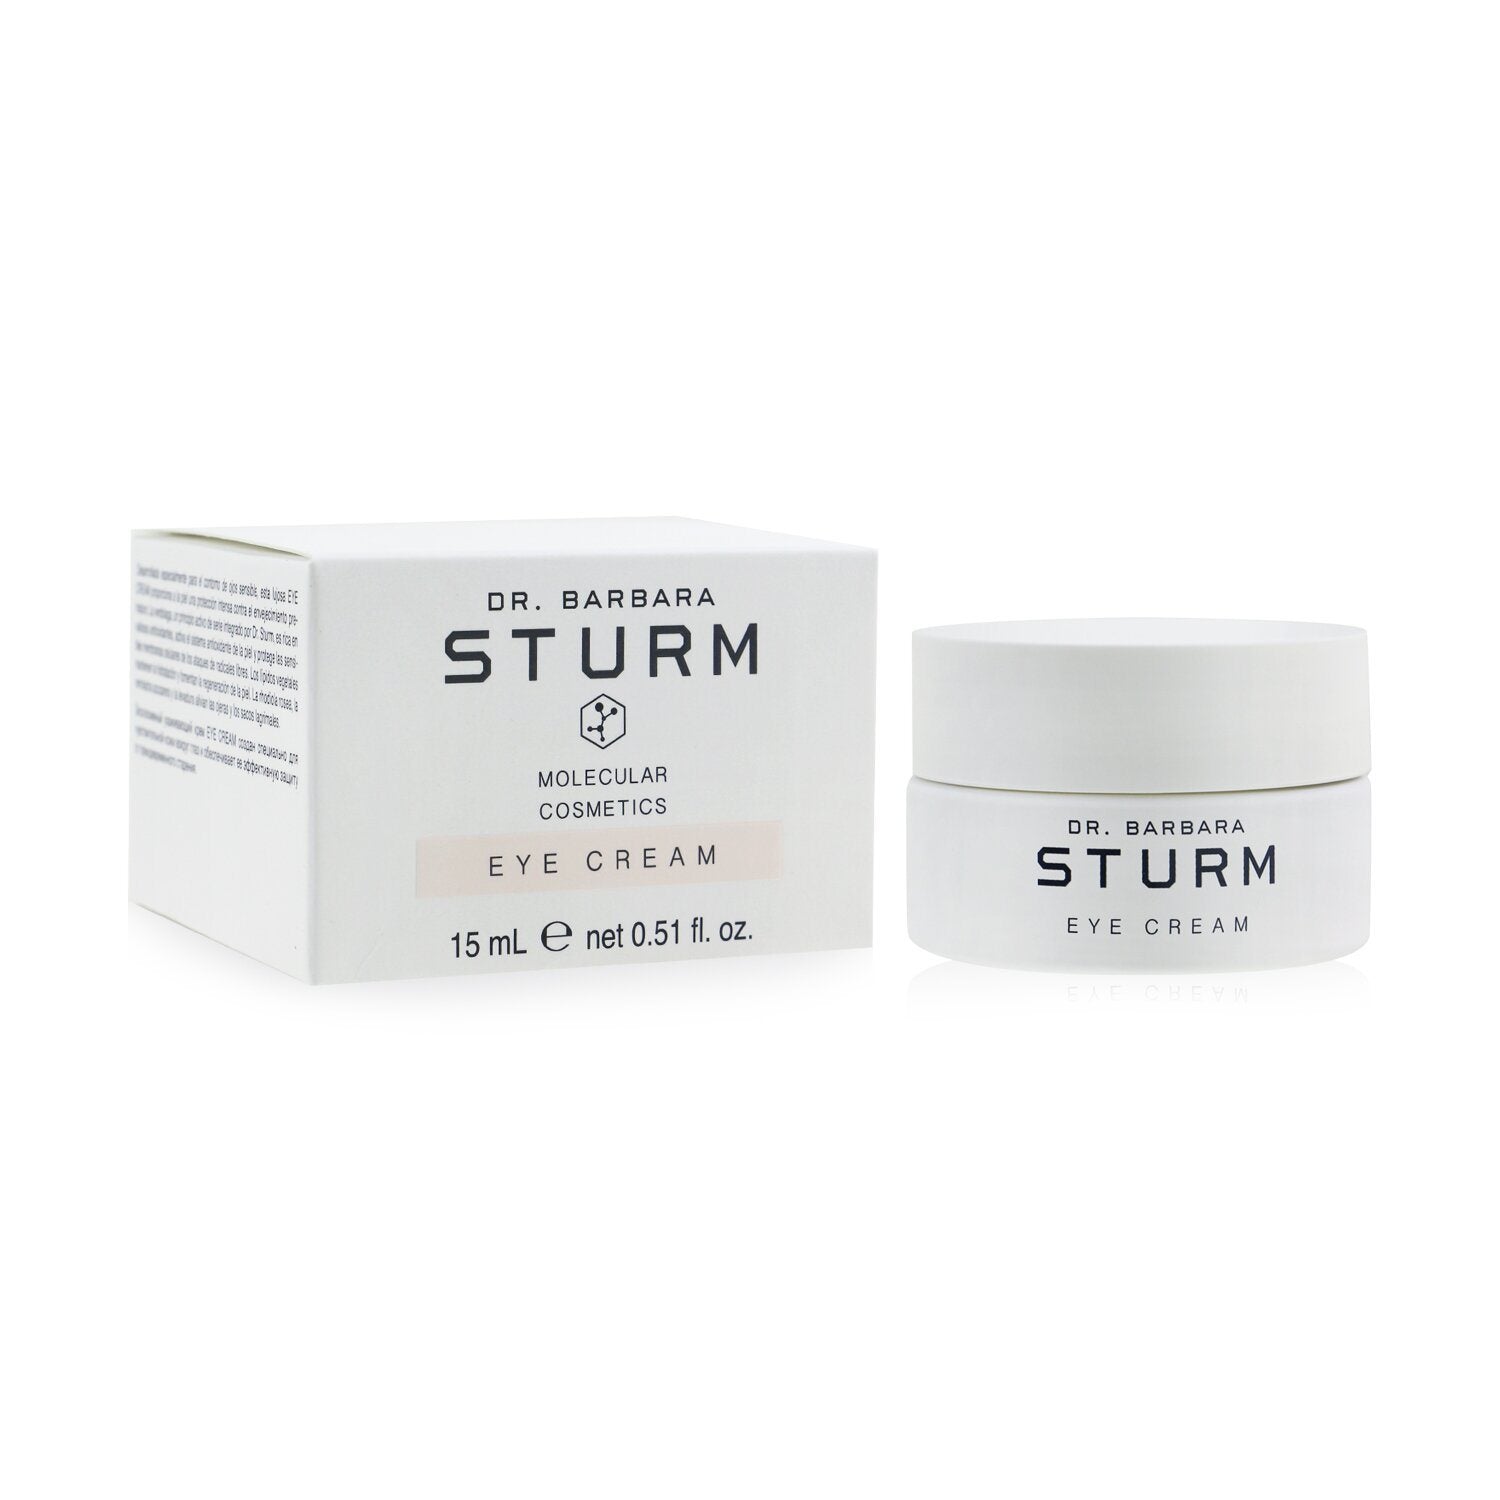 Eye Cream is a highly effective and hydrating solution for combating dark shadows around the eyes.